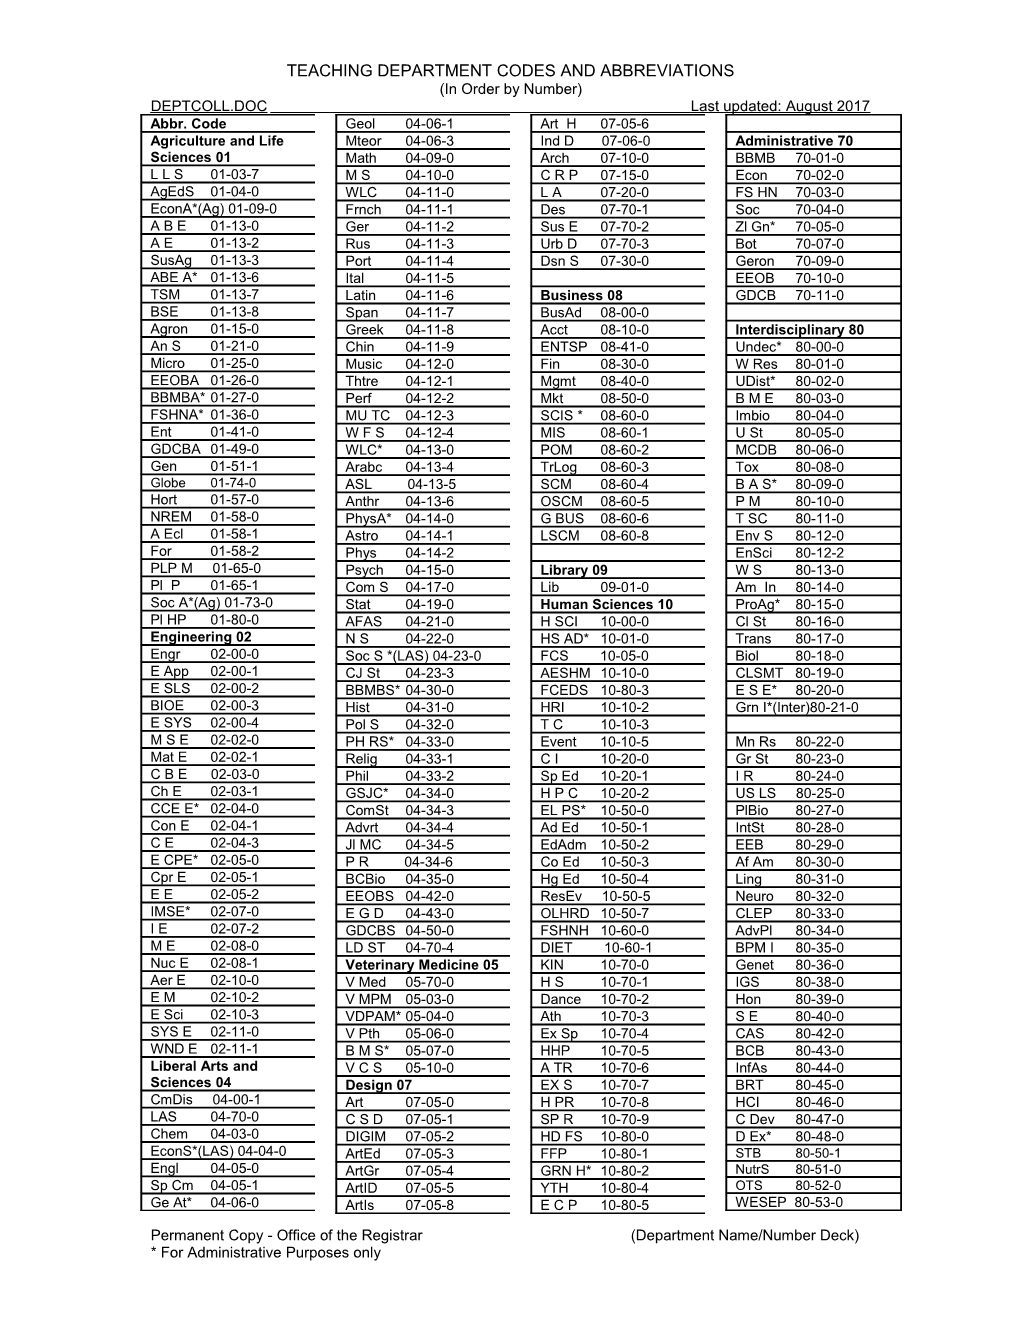 Teaching Department Codes and Abbreviations